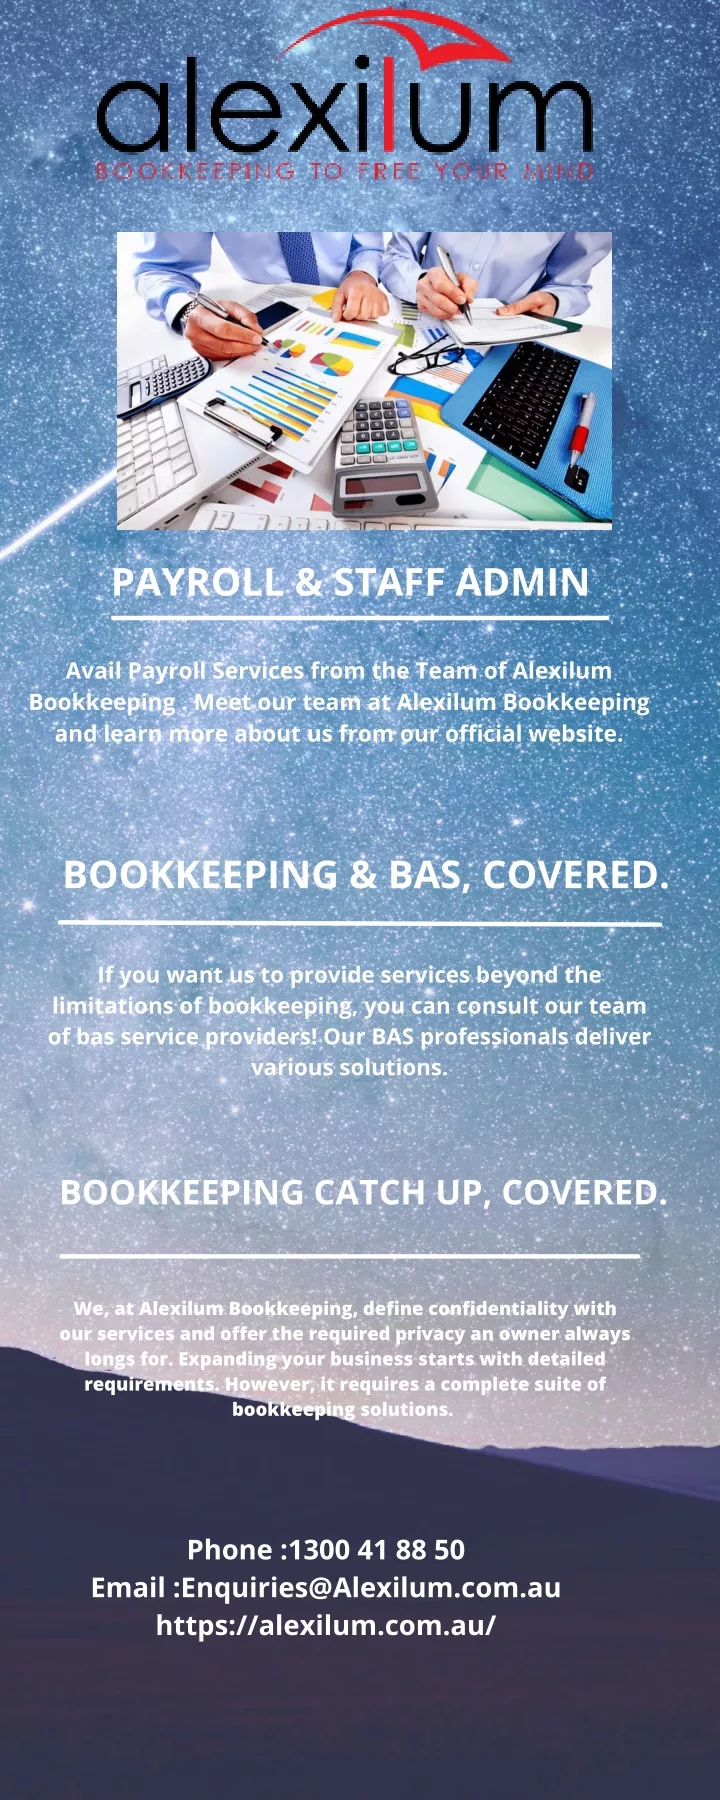 payroll staff admin avail payroll services from